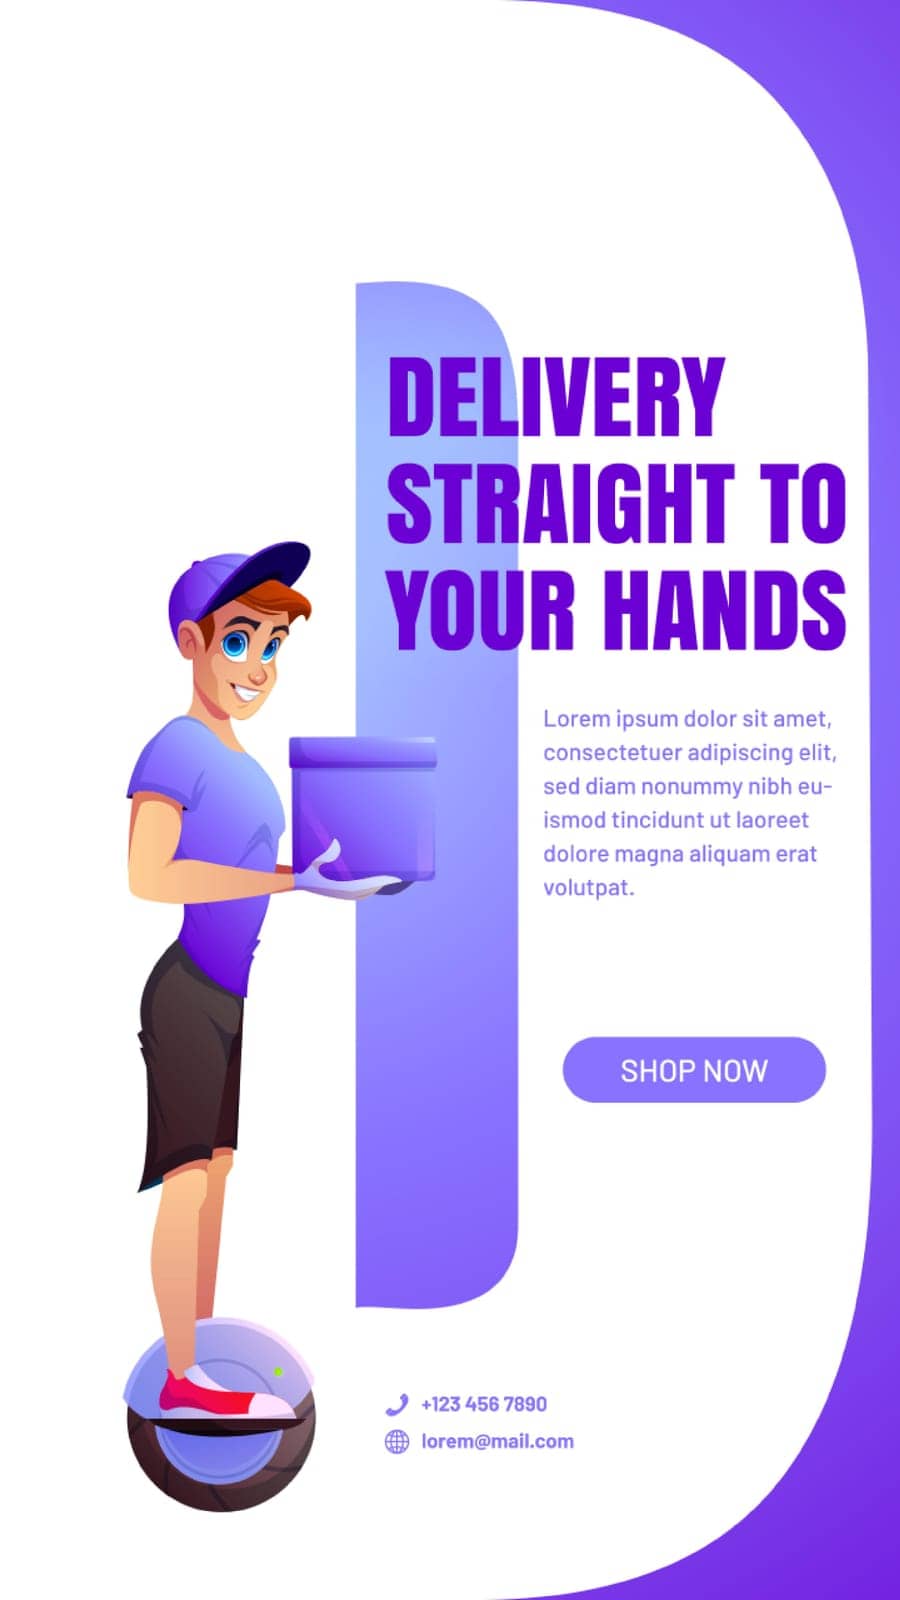 Delivery straight to your hands cartoon advert by upklyak